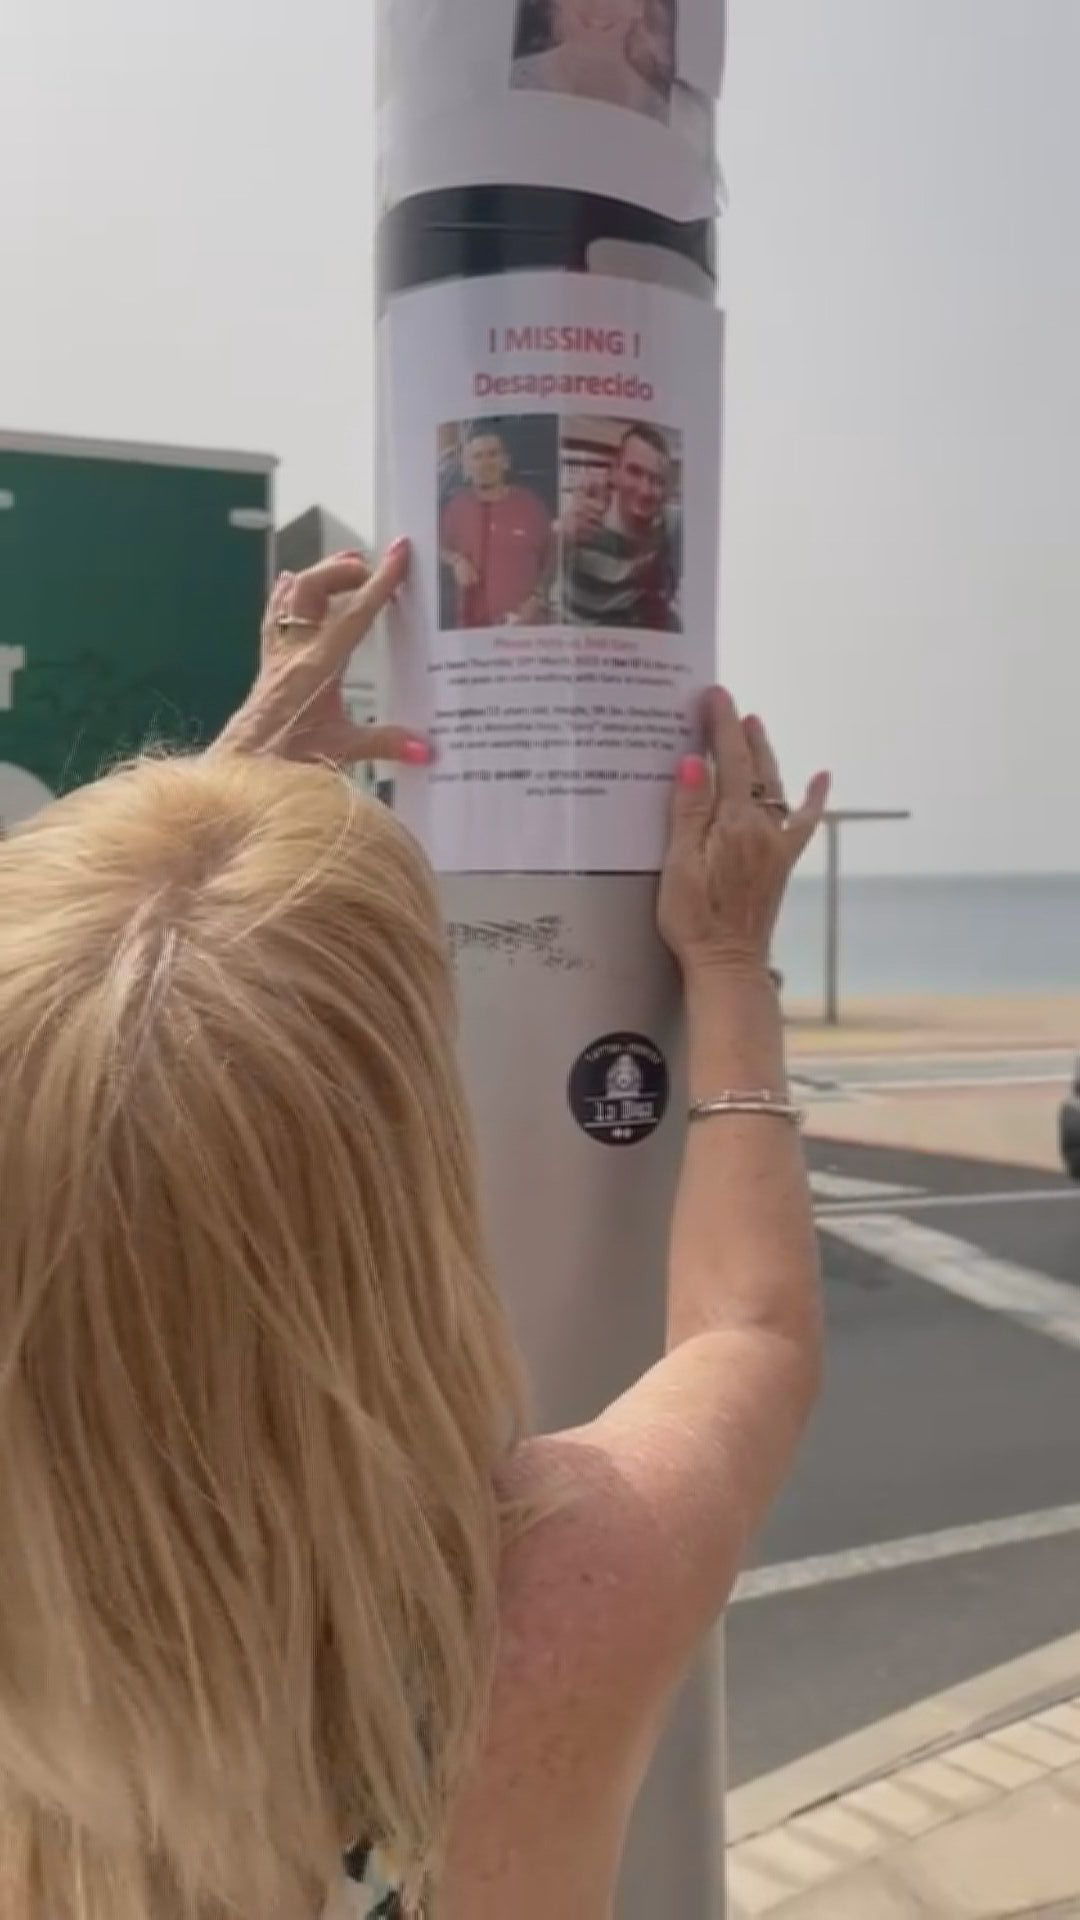 Gary's family have travelled to Lanzarote one year on from his disappearance to put up flyers urging anyone with information to come forward